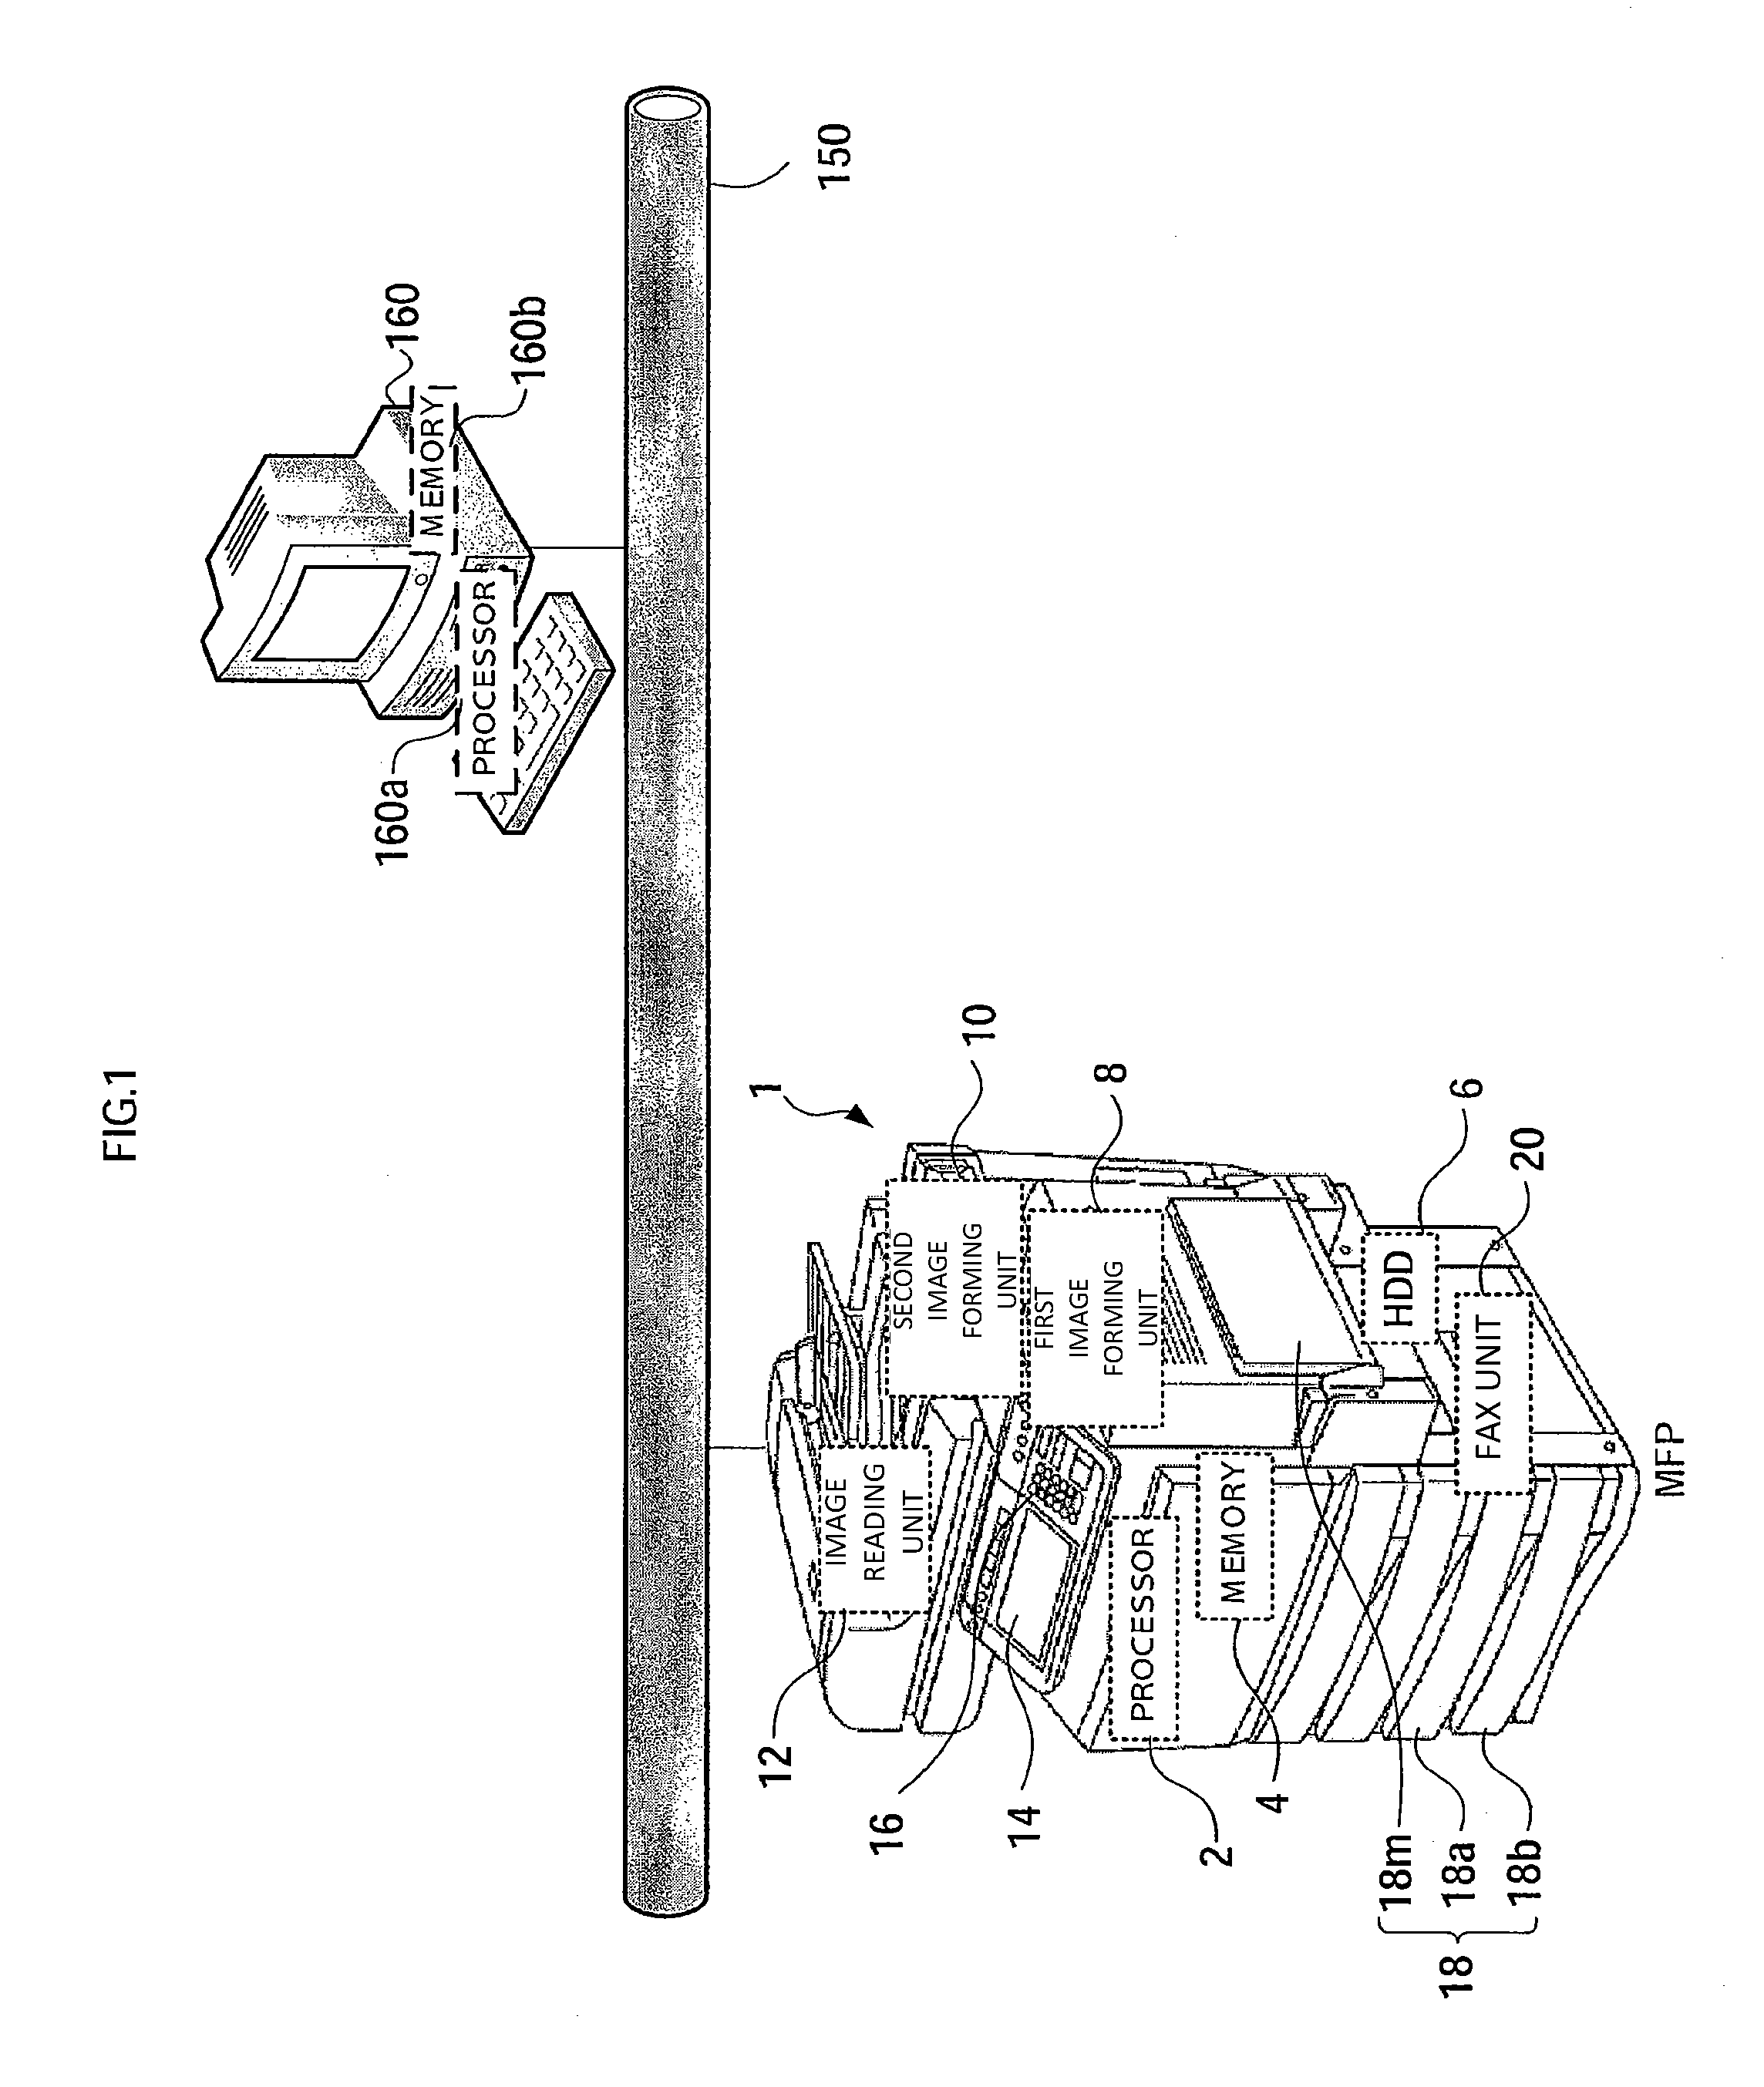 Image forming apparatus, image forming method, and computer-readable recording medium having image forming program recorded therein